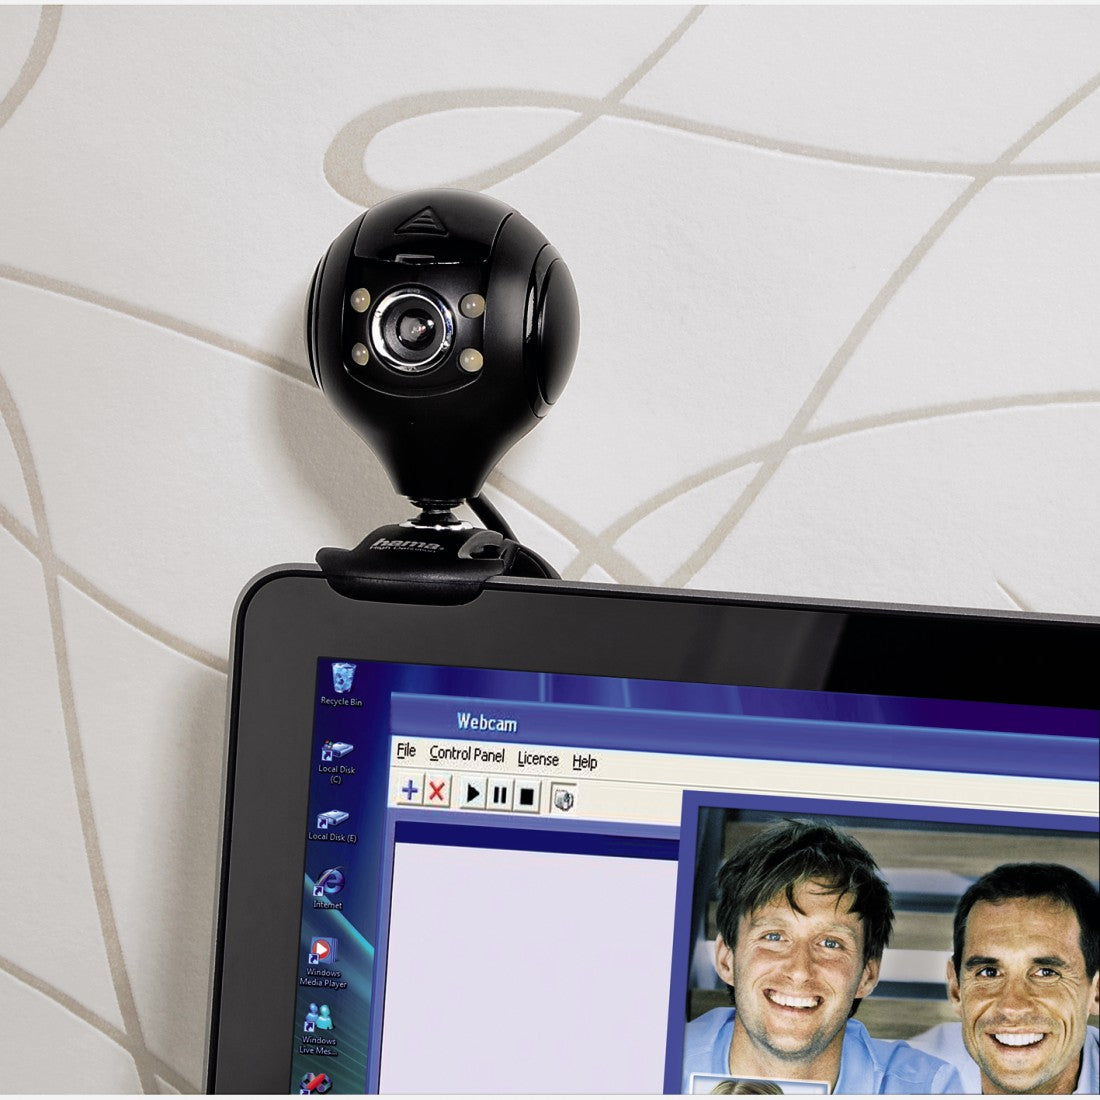 Hama 720P HD Spy Protect Webcam - Black | 539502 from Hama - DID Electrical